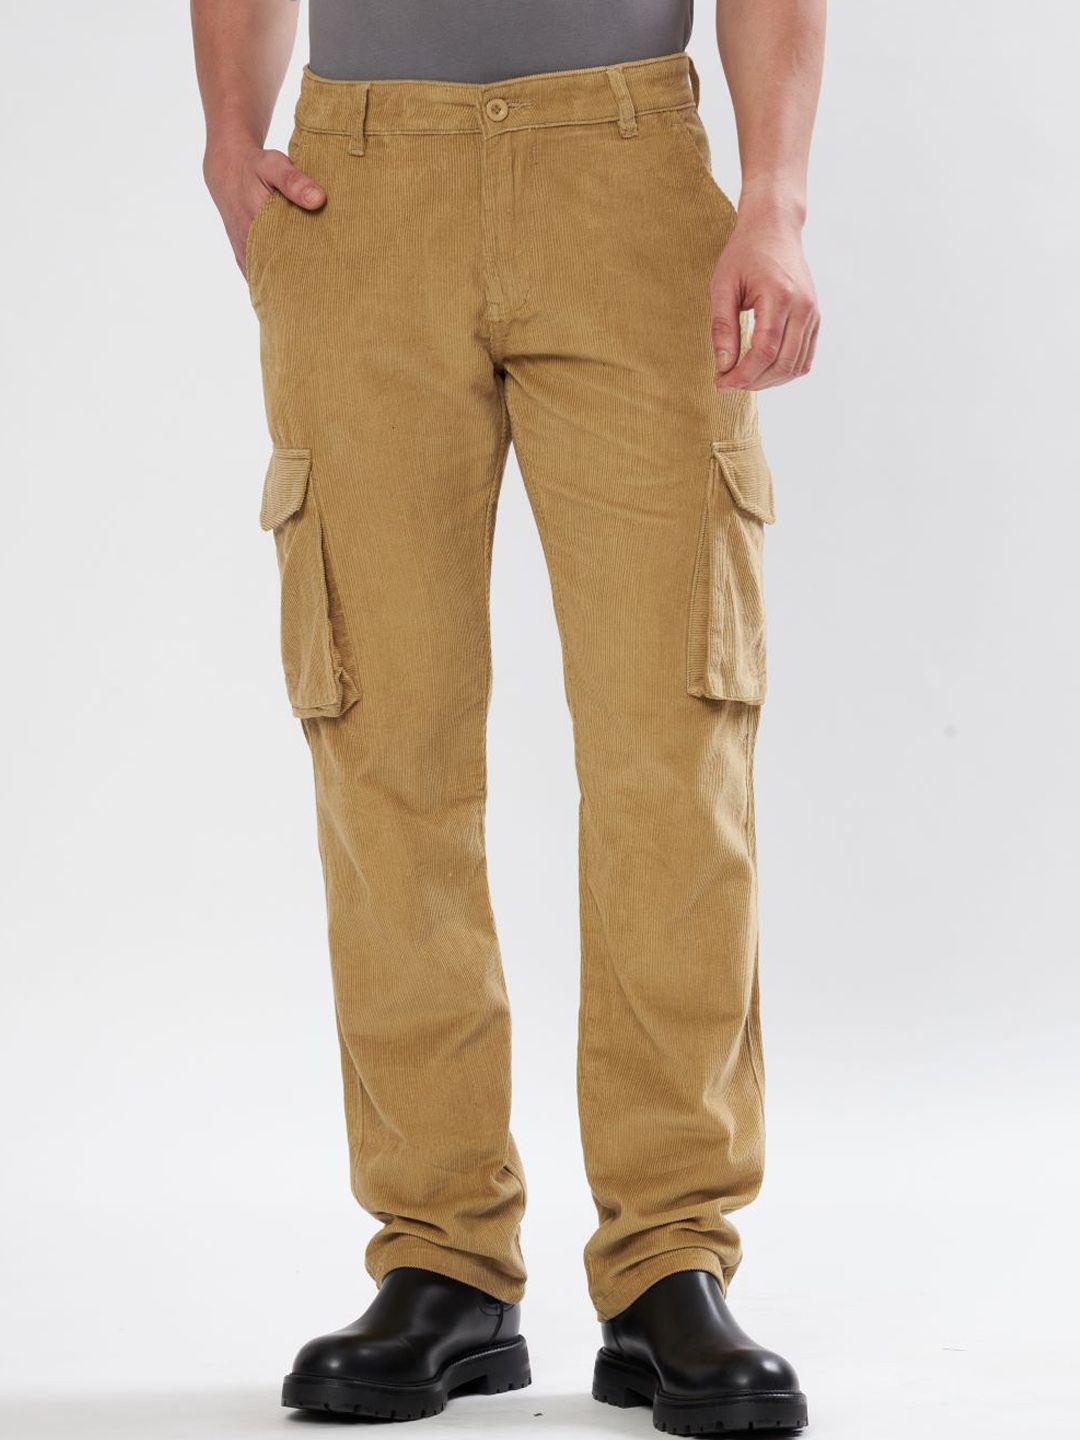 united-denim-men-relaxed-fit-cargo-trousers